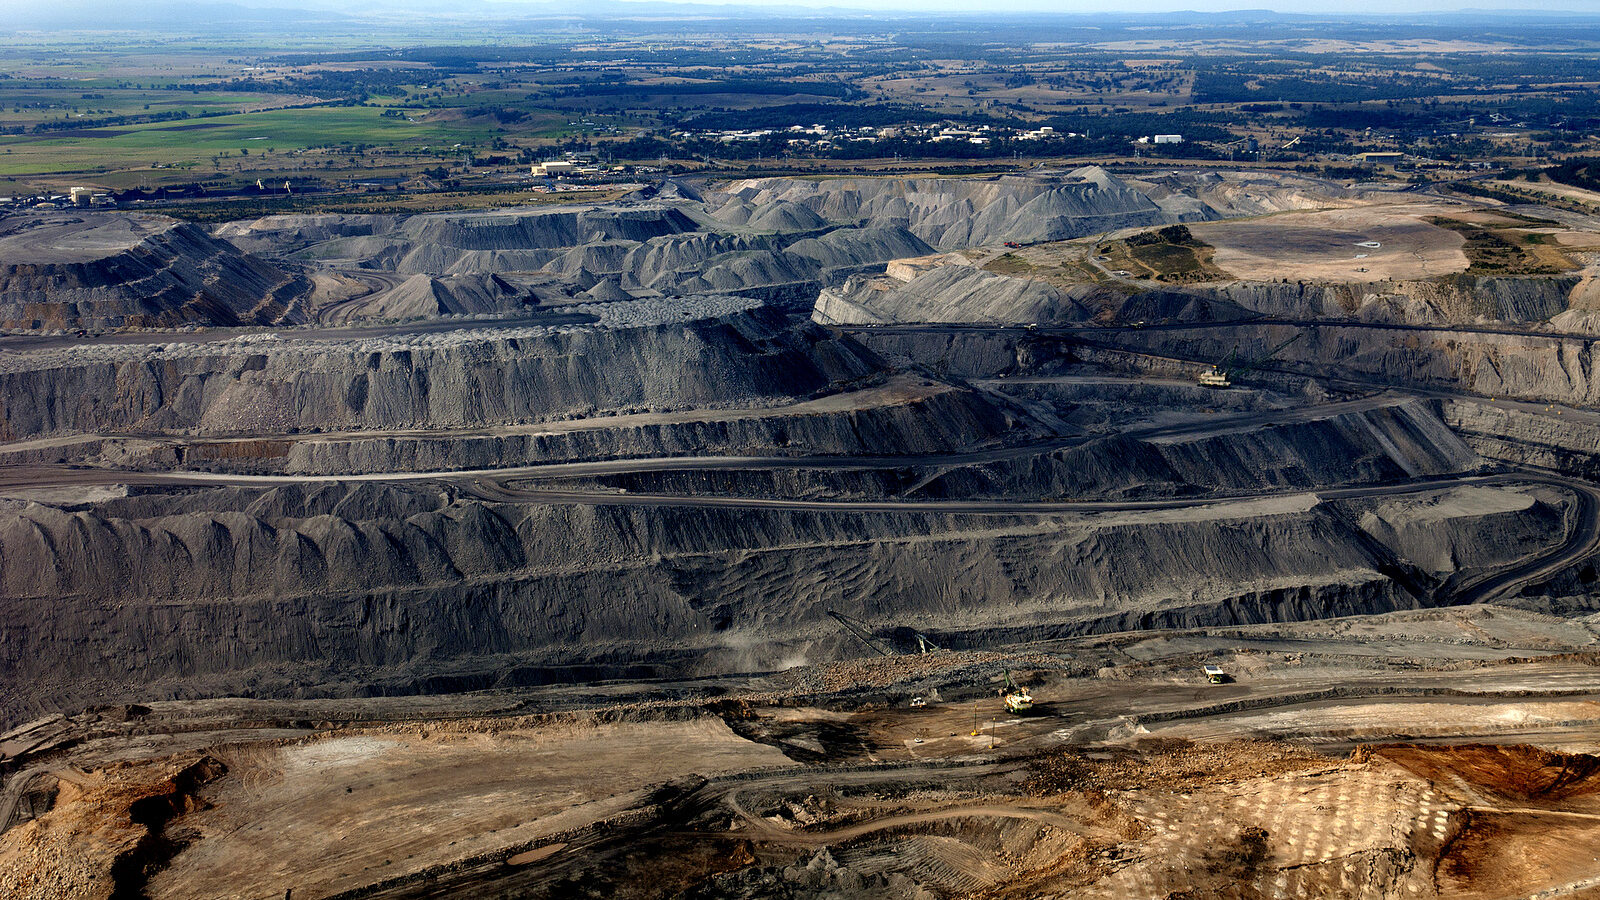 An open cut coal mine in the Hunter Valley area of New South Wales, Australia. (Photo: Max Phillips/Jeremy Buckingham MLC)